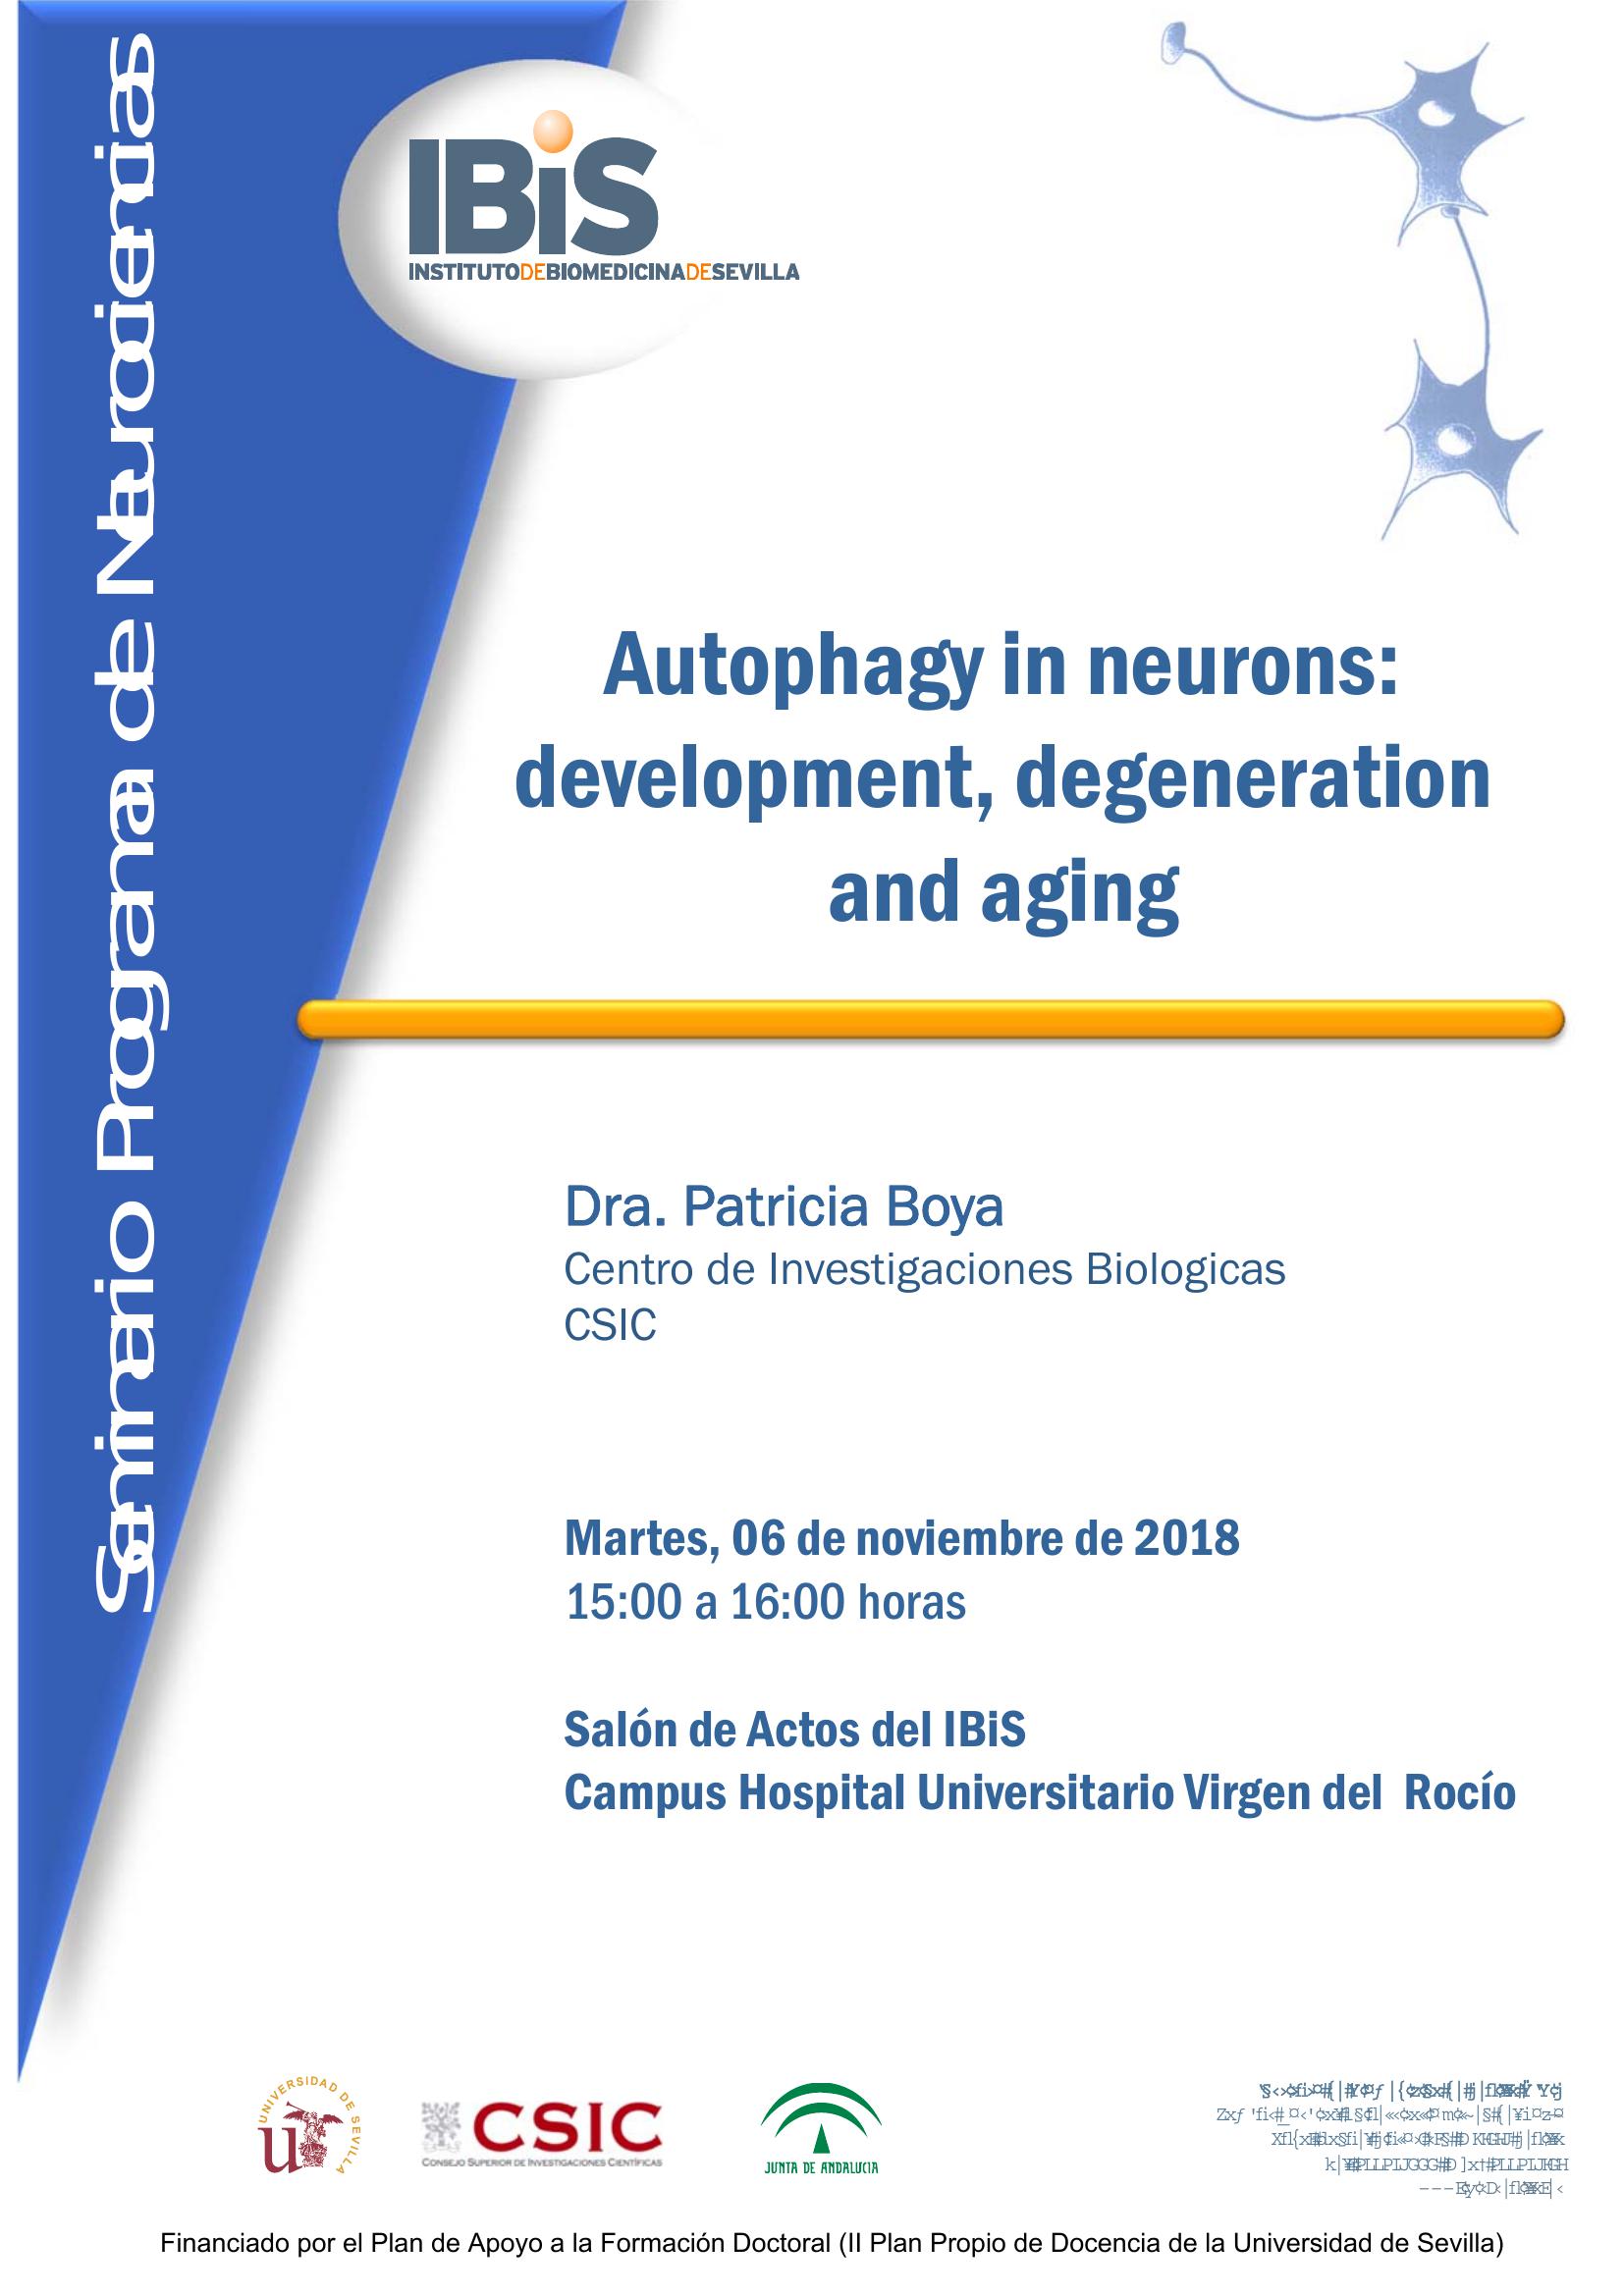 Poster: Autophagy in neurons: development, degeneration and aging